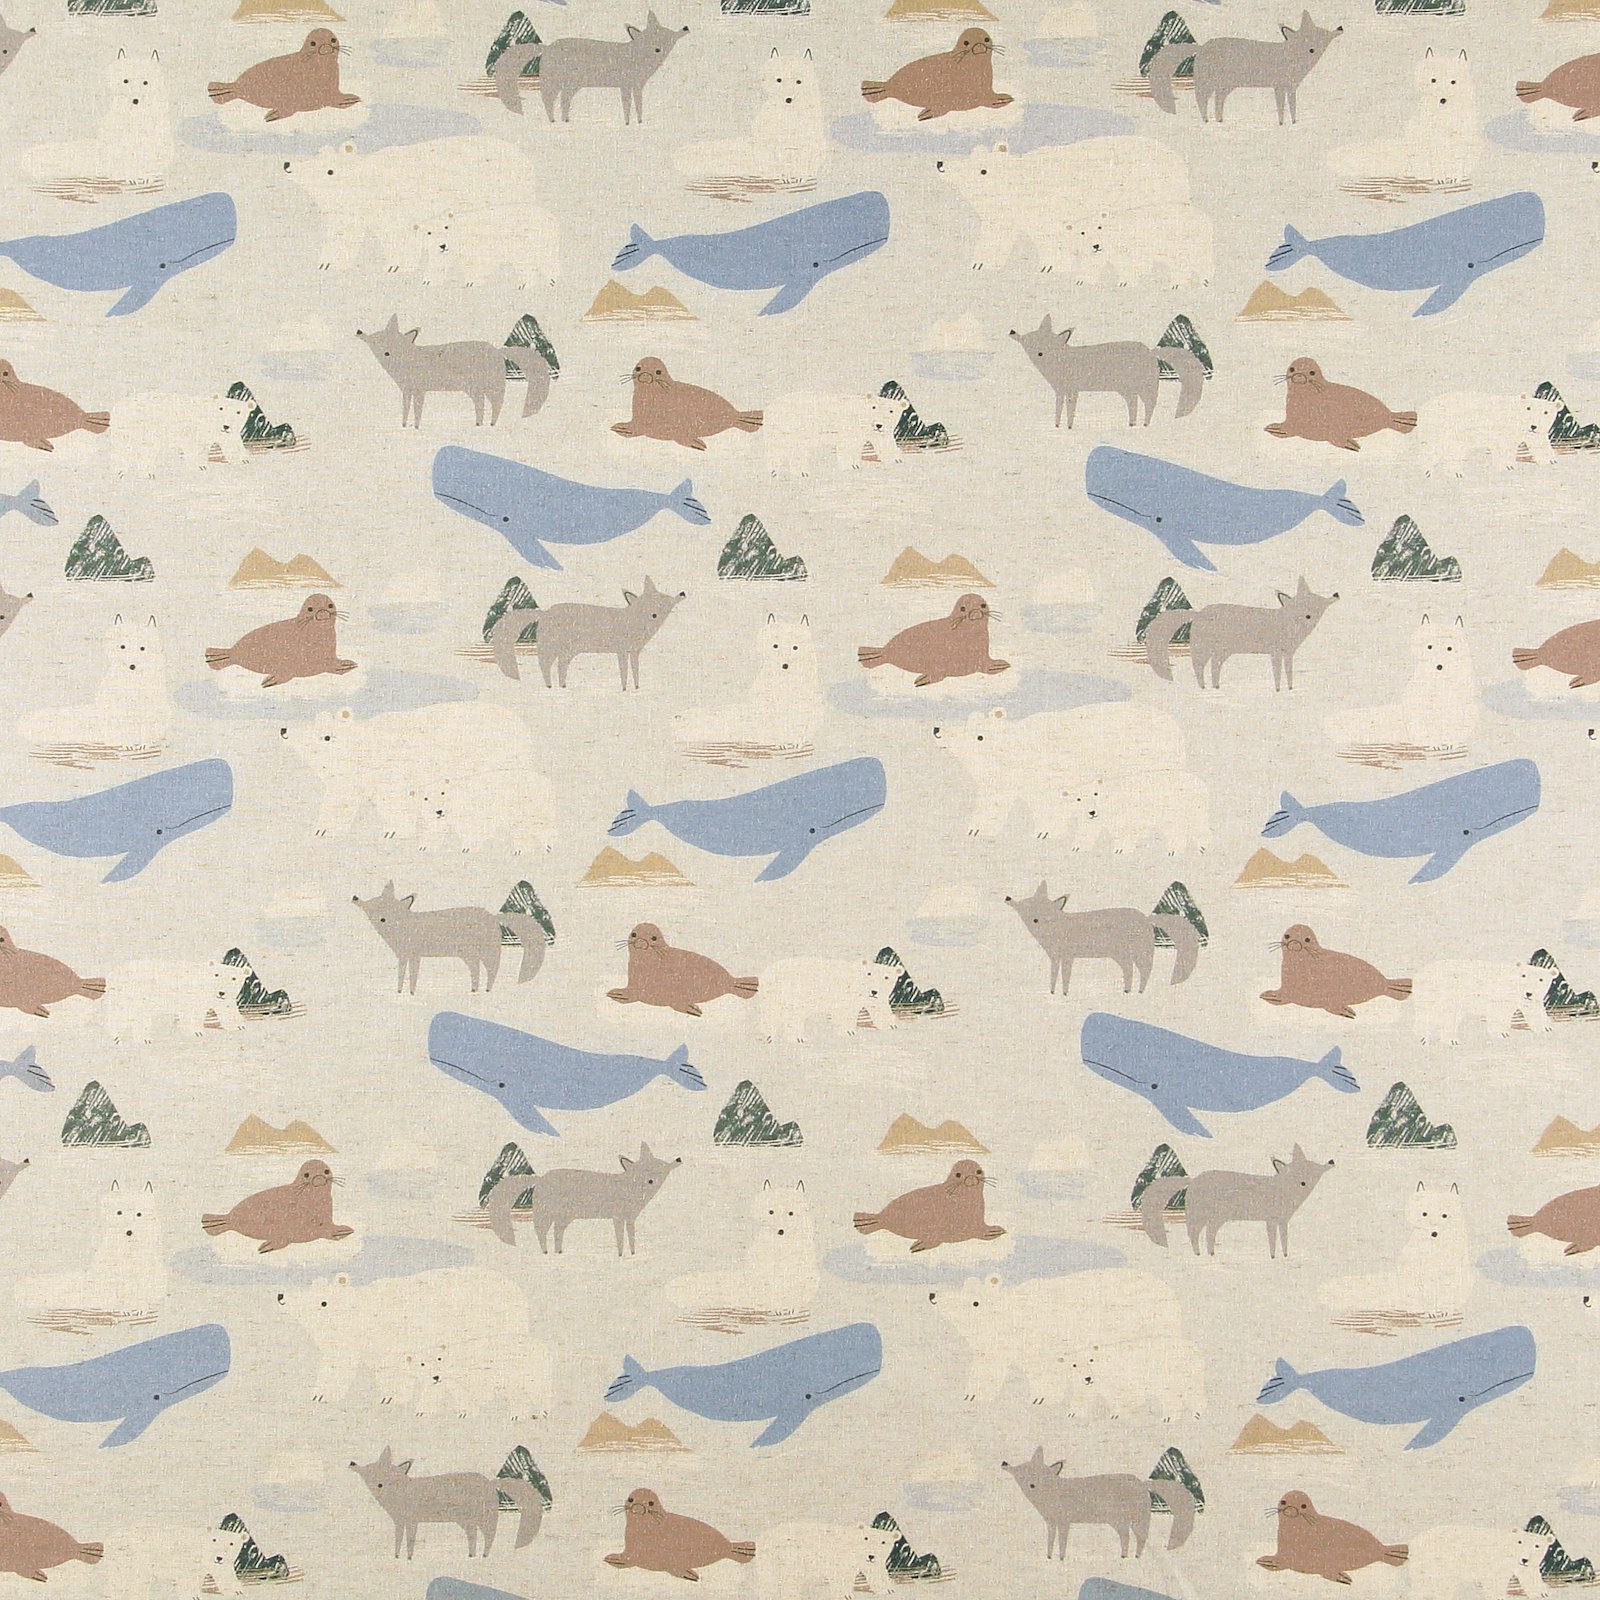 Woven cotton/linen with northern animals 780730_pack_sp